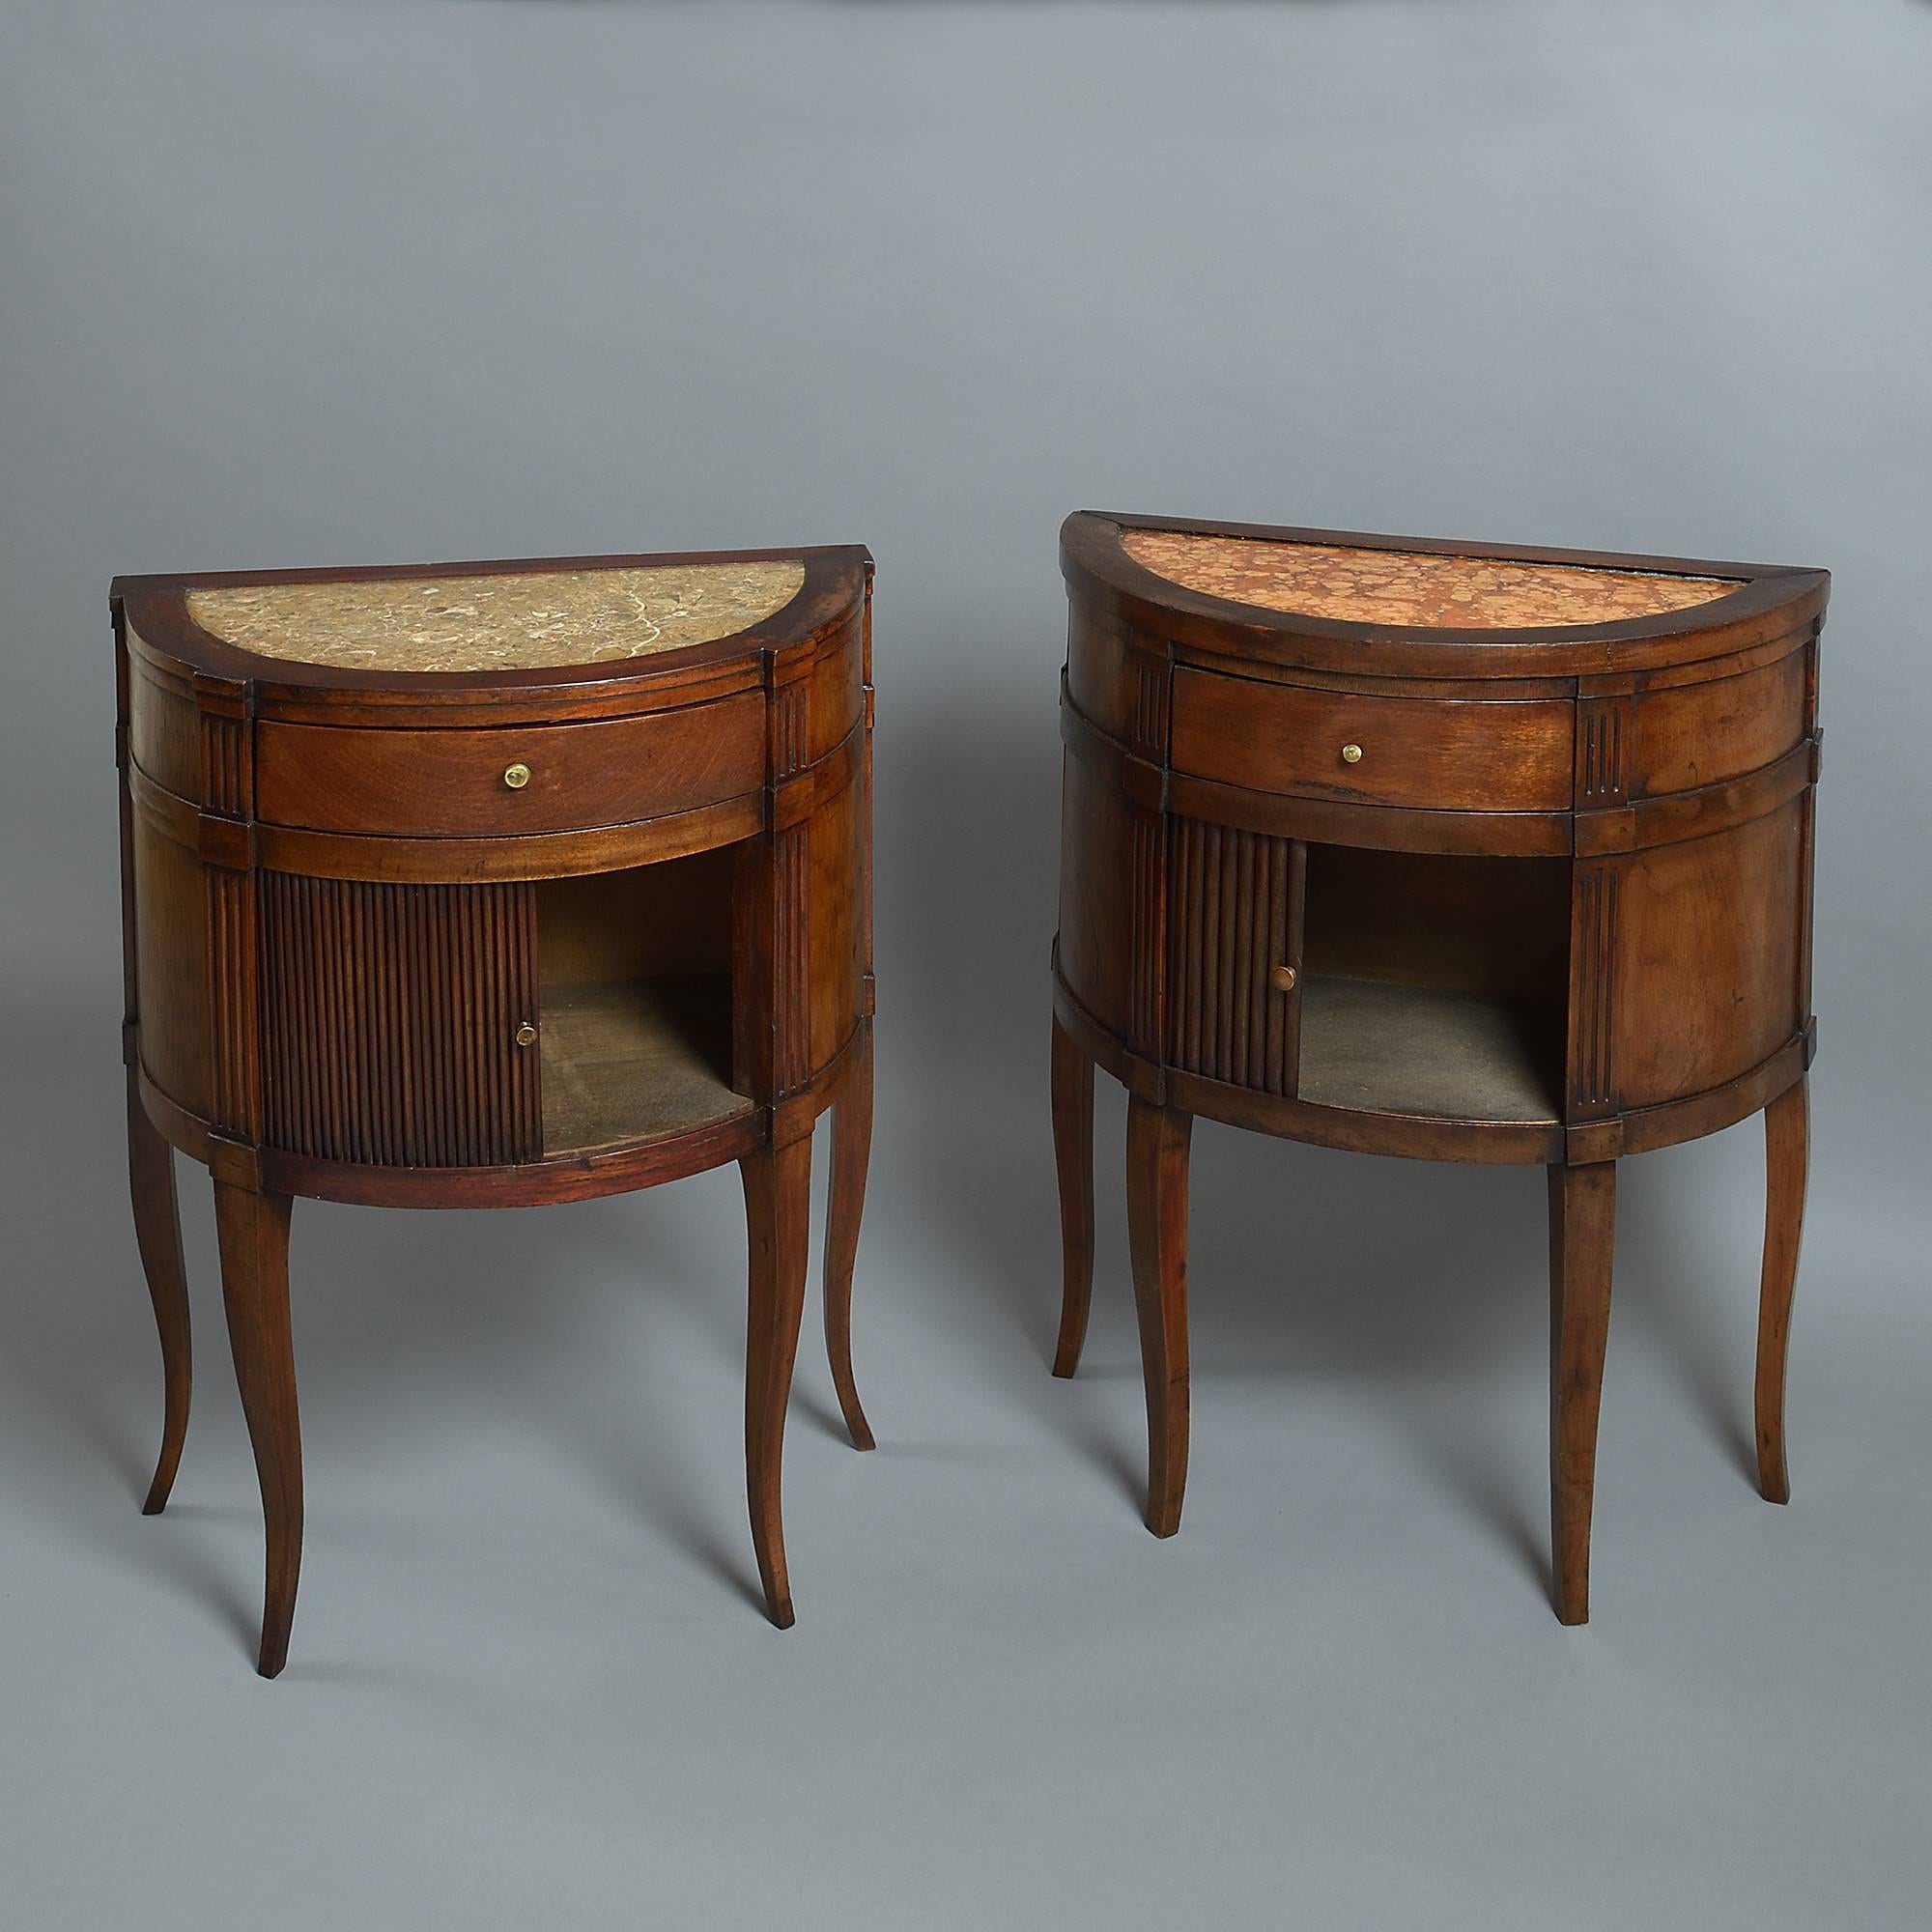 A matched pair of Directoire period walnut commodes of demilune form, having inset marble tops, with pilasters and tambour fronts and standing on shaped tapering square legs.

Height of second commode: 30 3/4 inches (78.1 cm) 
Width of second